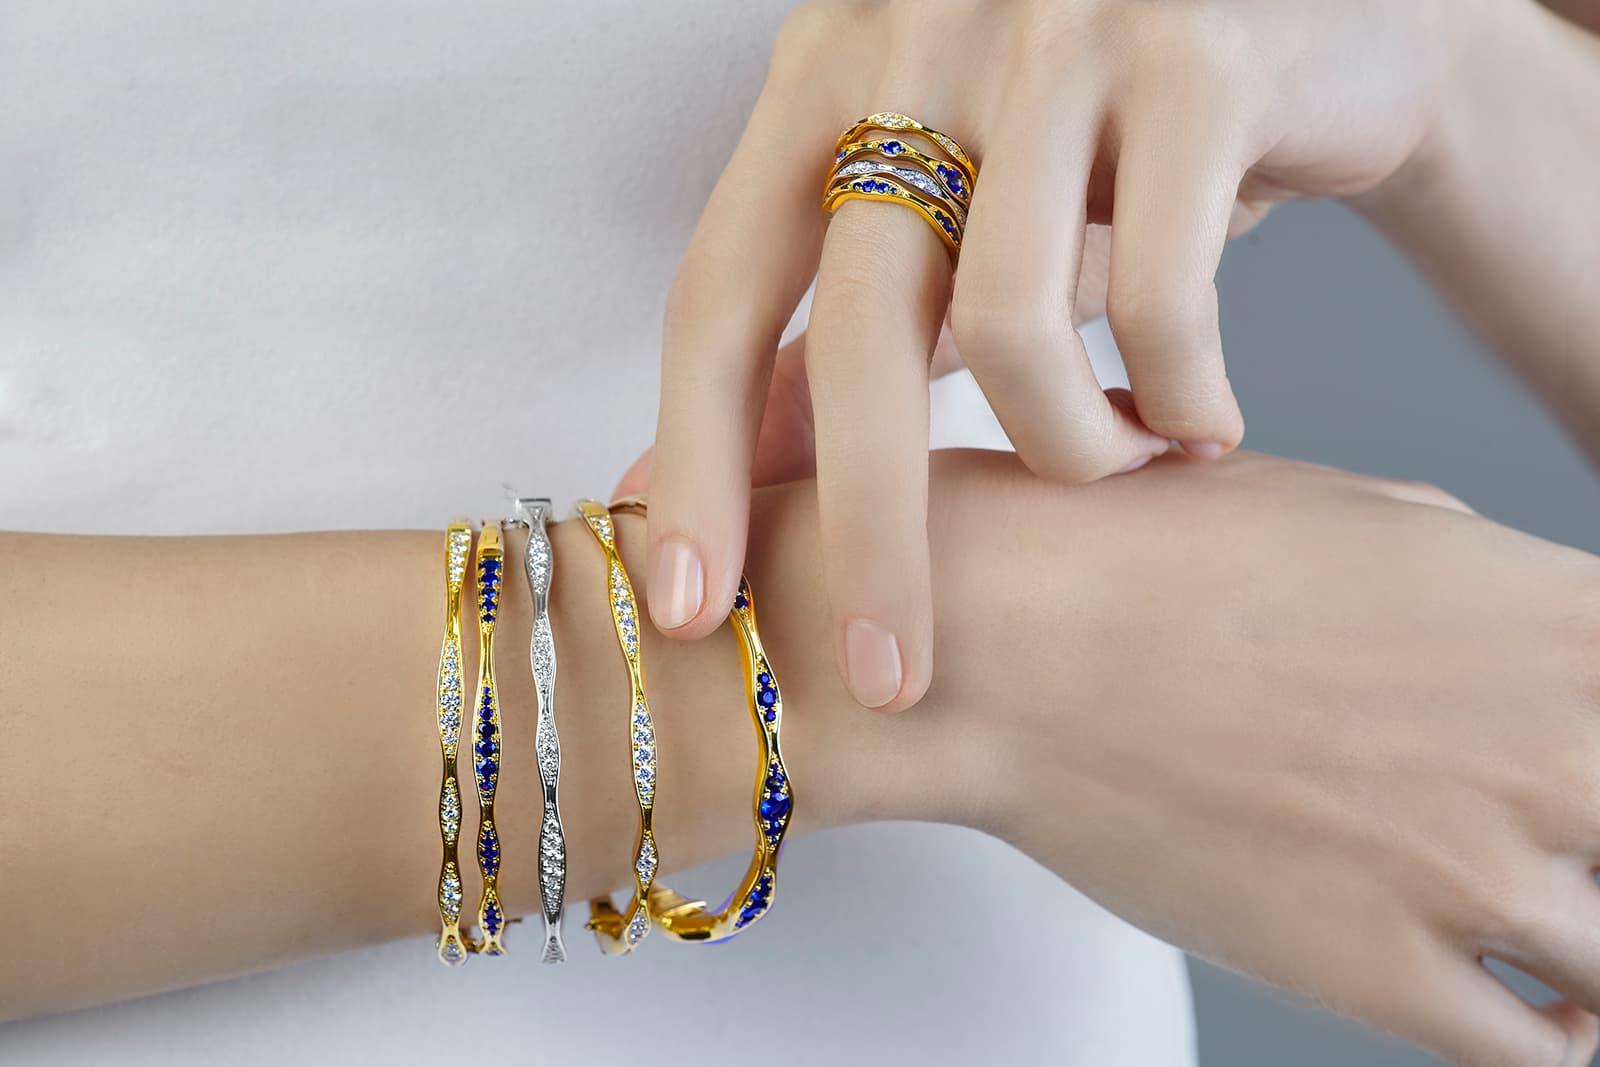 Maria Canale 'Wave' collection rings and bangles with sapphires and diamonds in 18k white or yellow gold respectively